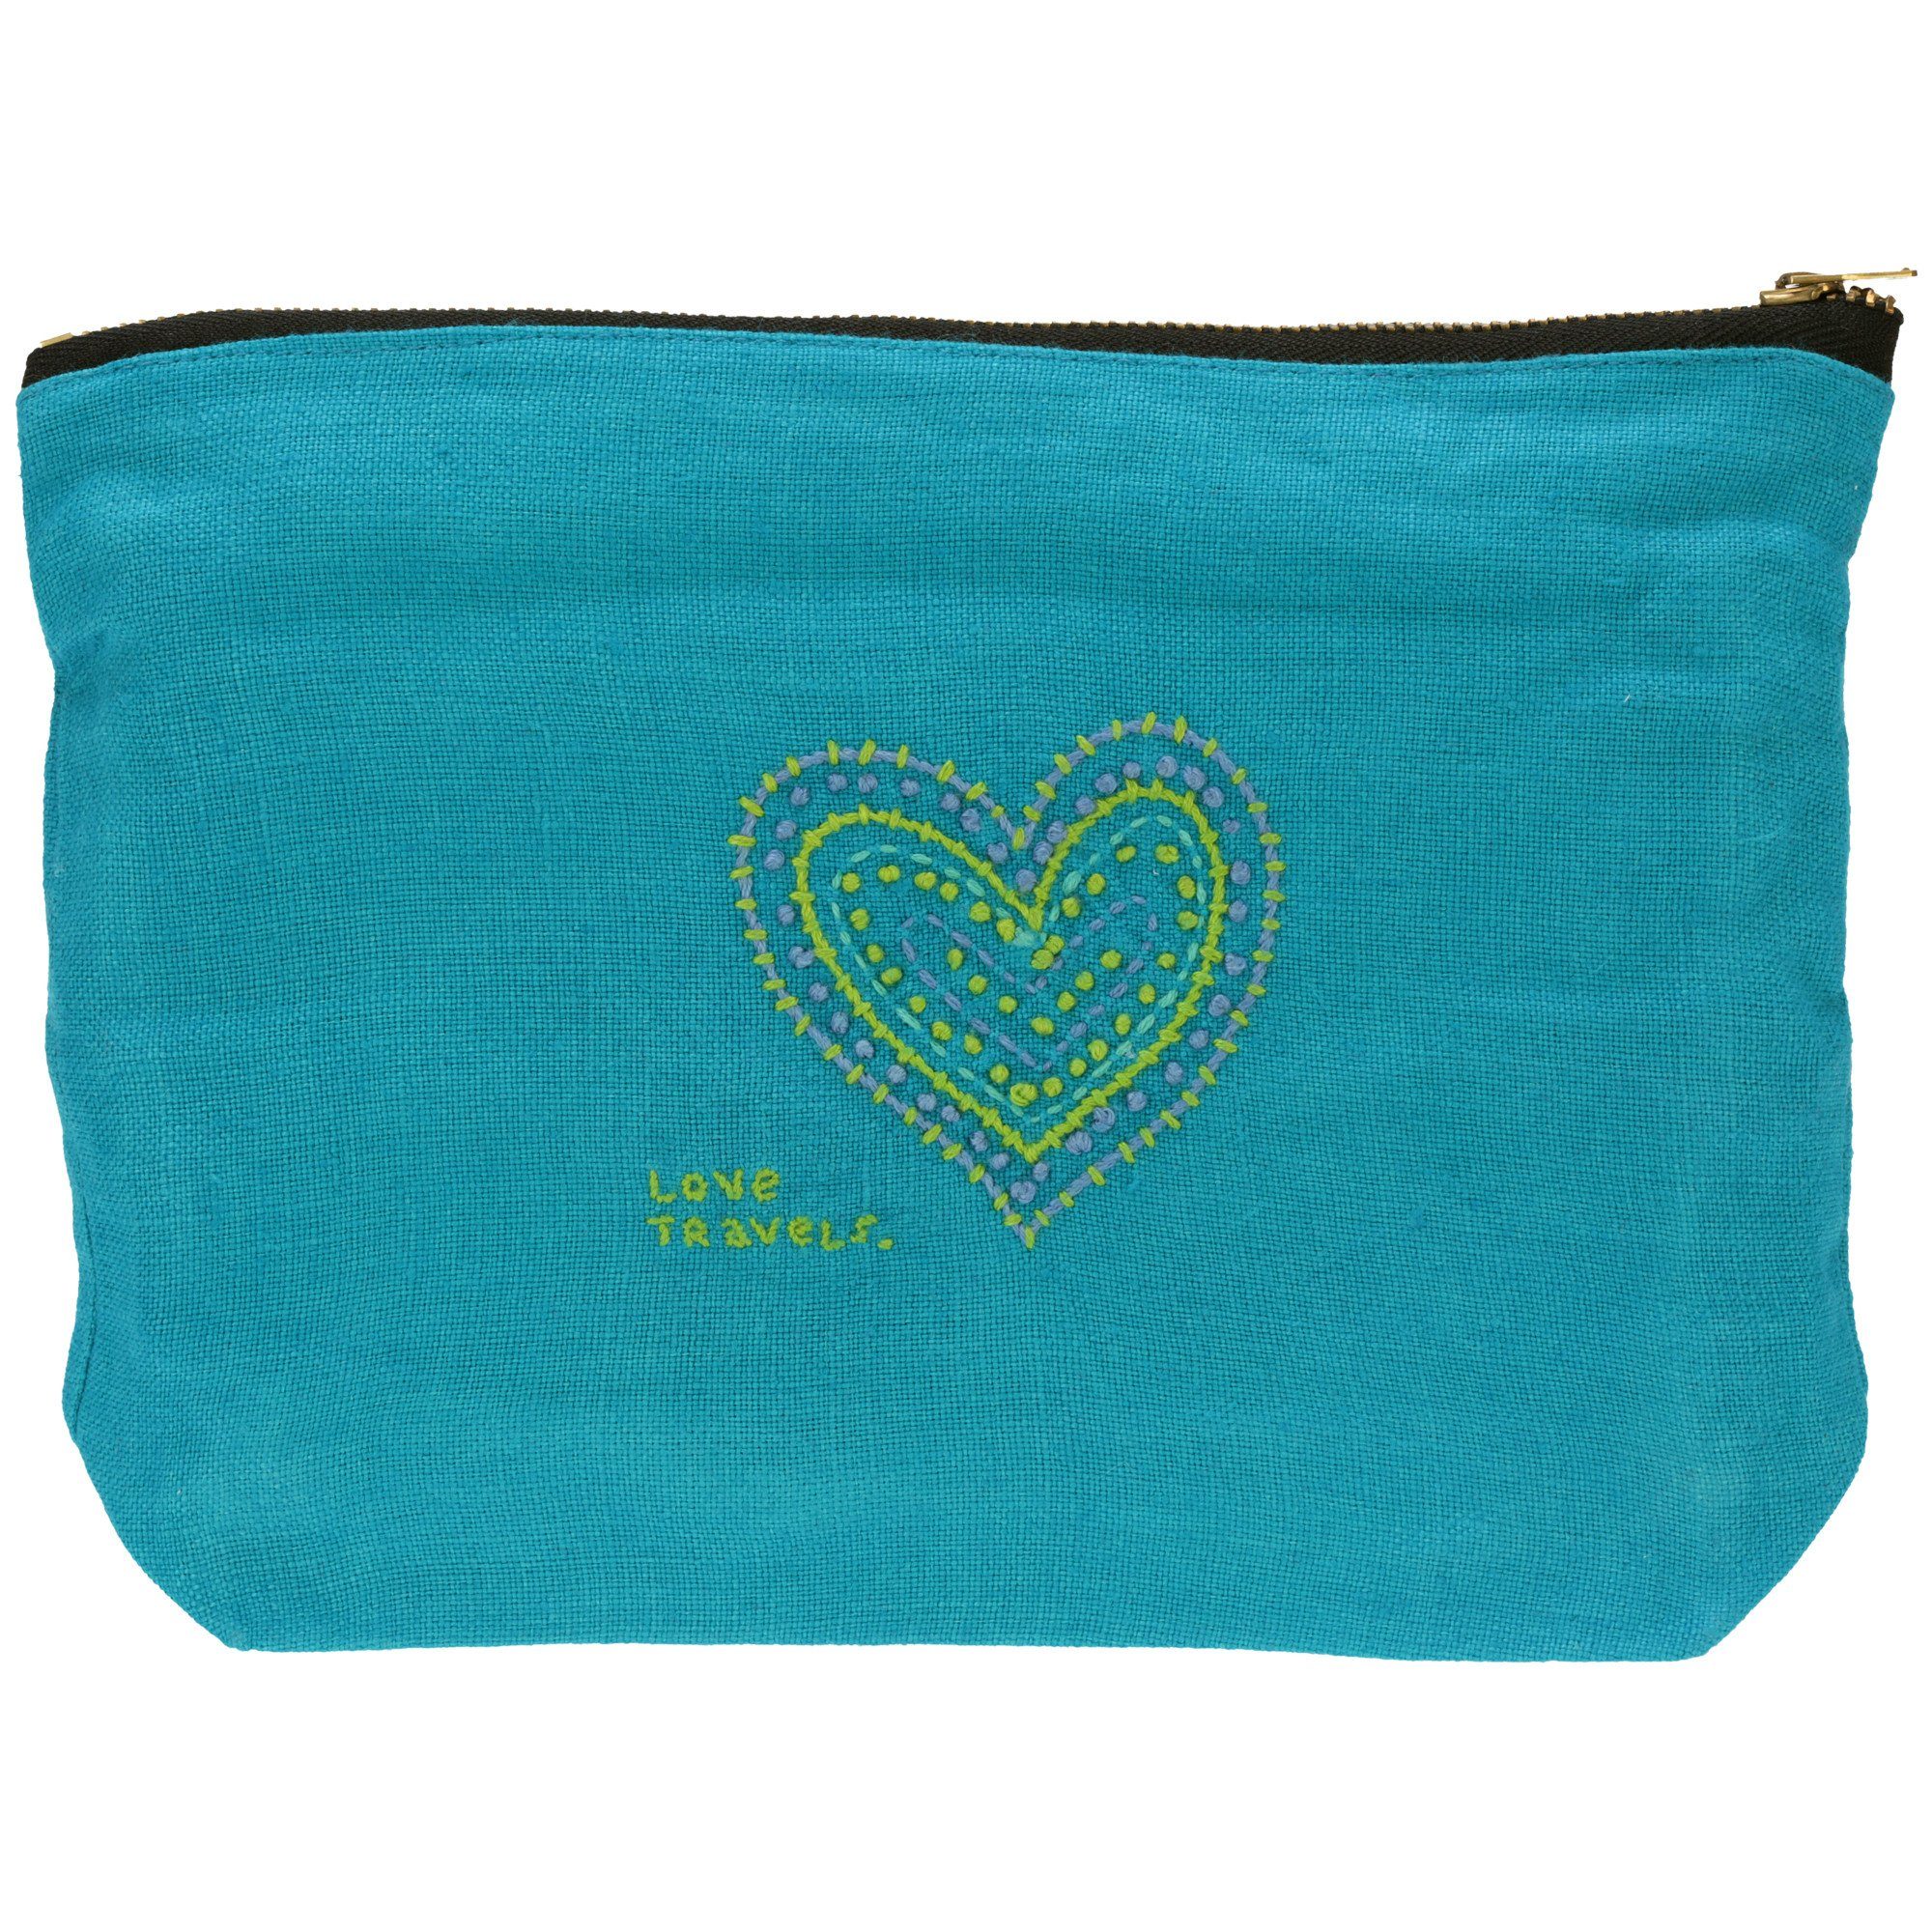 Love Travels Pouch - Turquoise